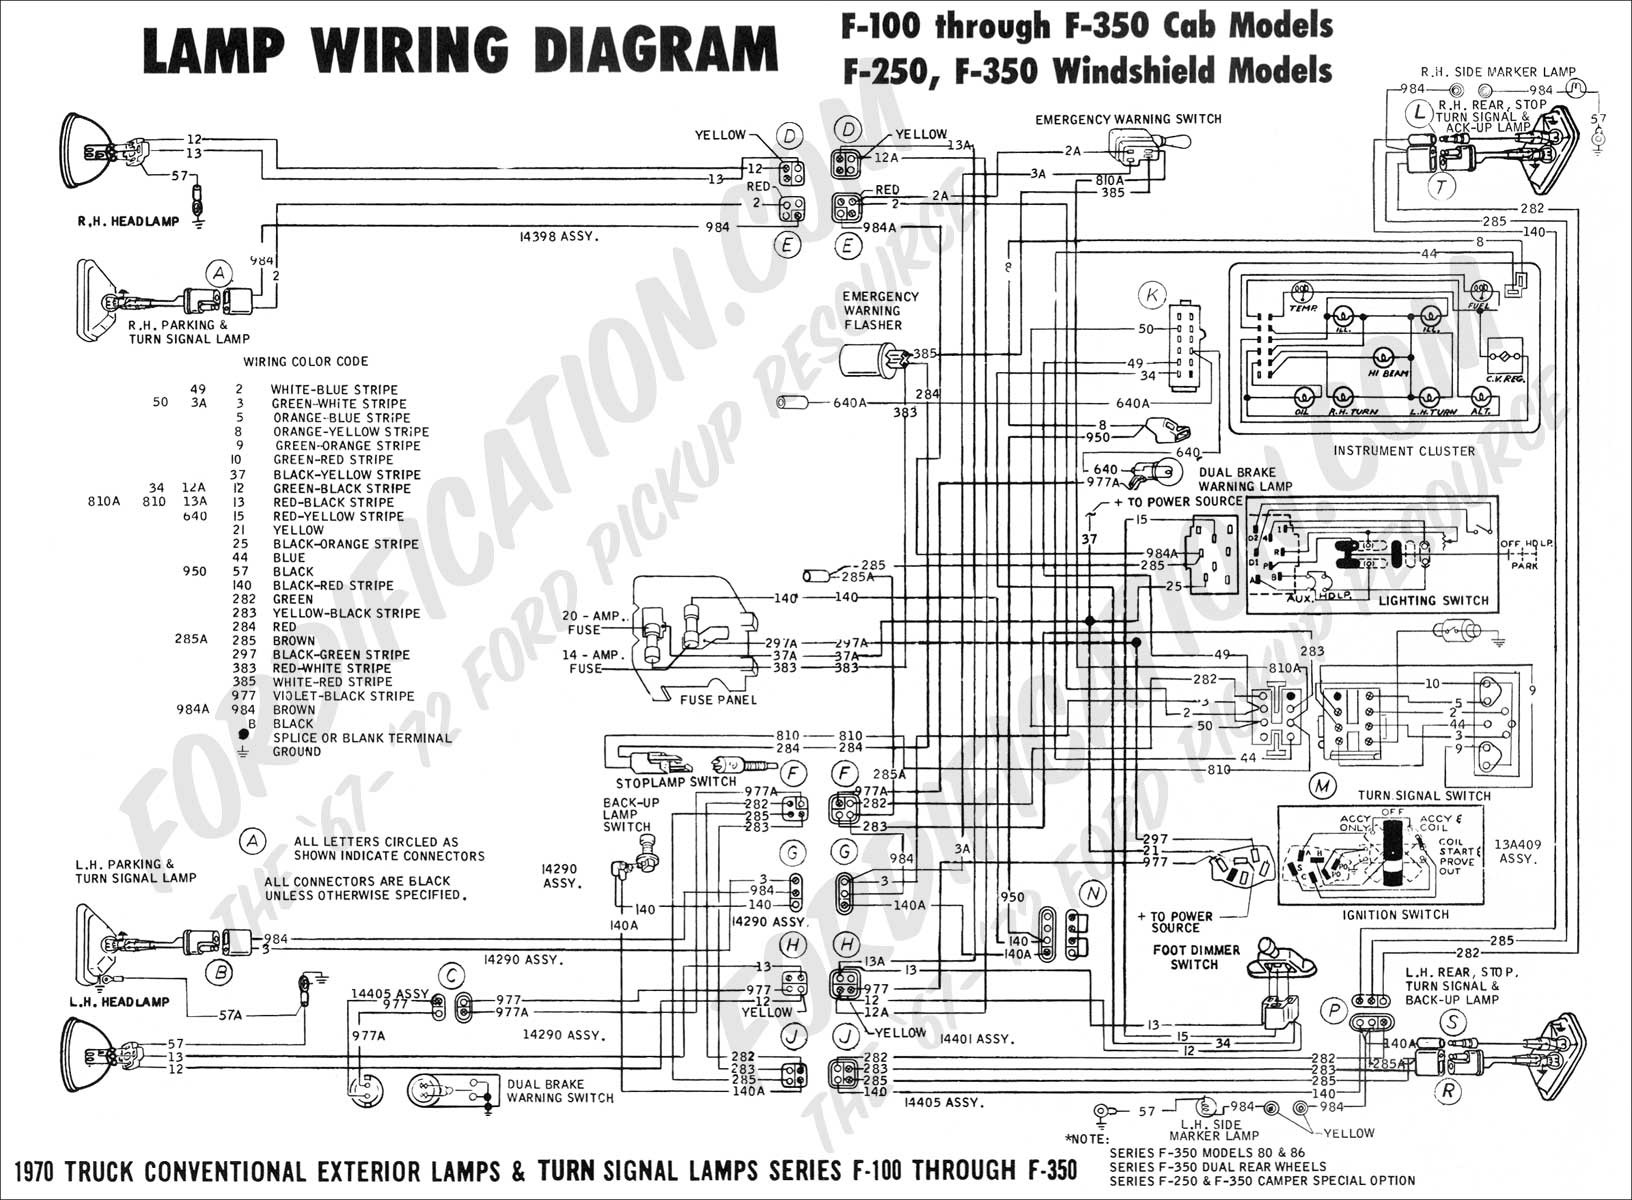 2004 ford Ranger Wiring Diagram ford F700 Wiring Diagrams Additionally Dodge Under Hood Wiring Of 2004 ford Ranger Wiring Diagram